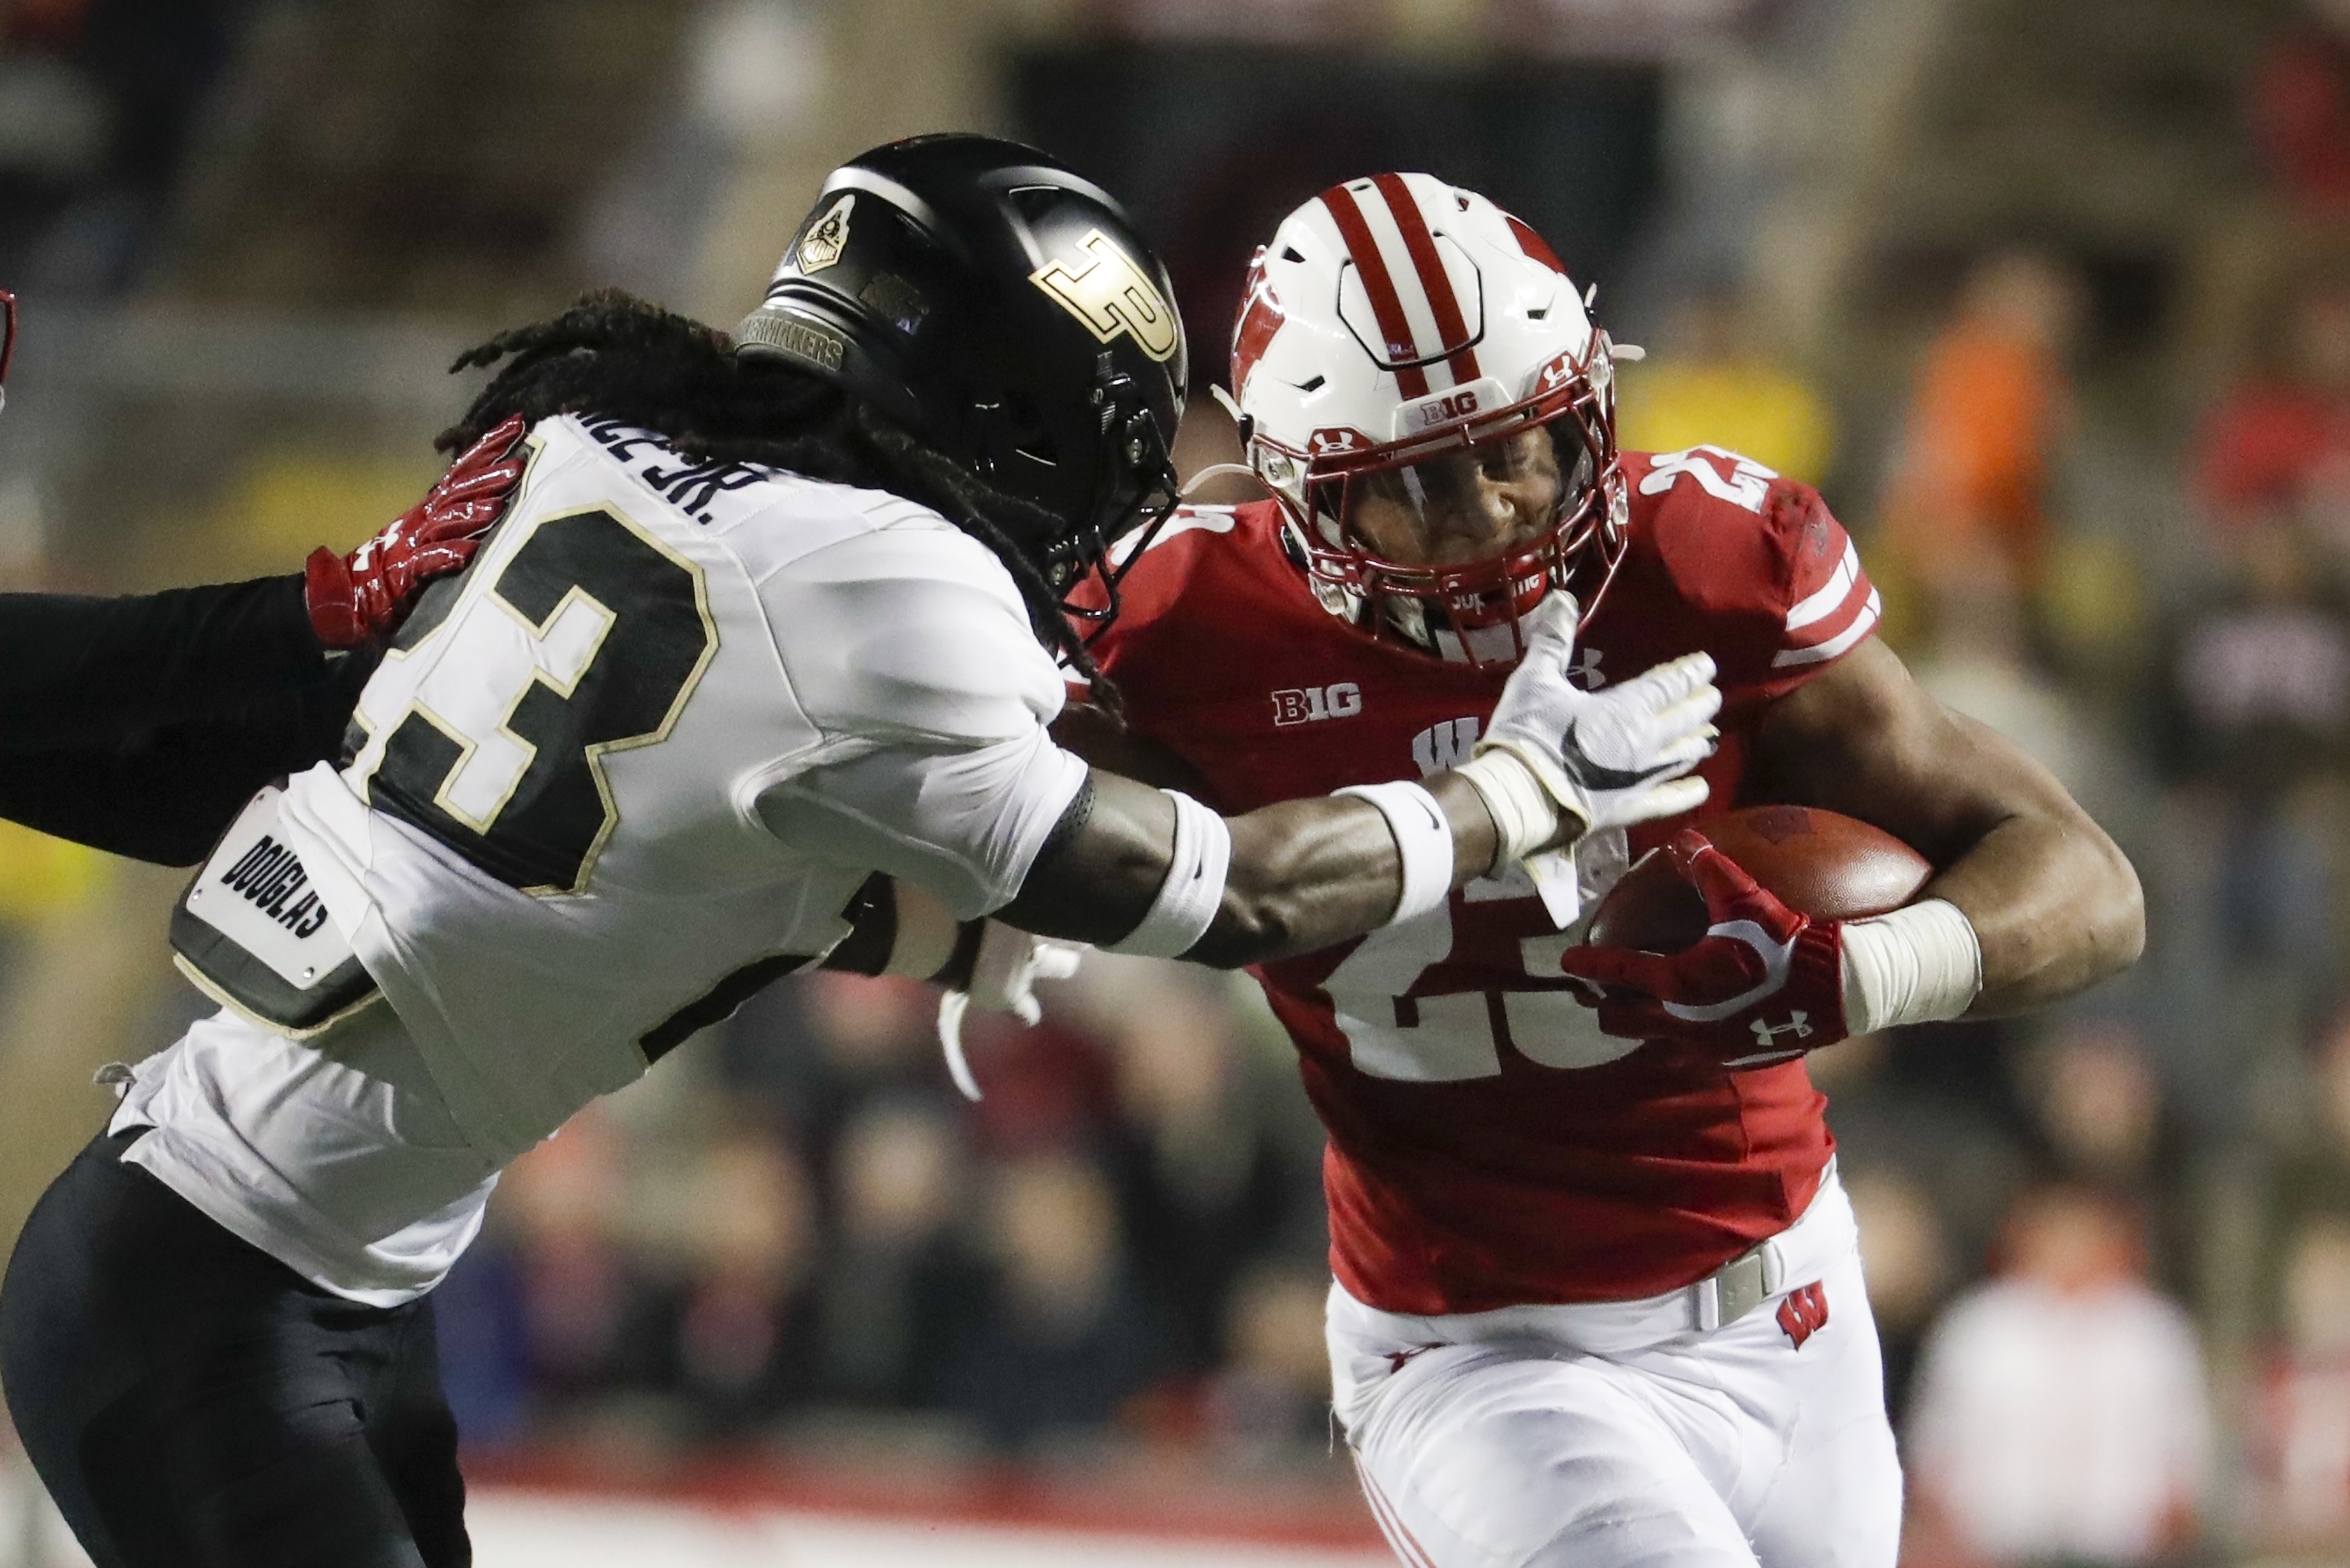 Taylor runs for 222 in No. 14 Badgers’ 45-24 win over Purdue